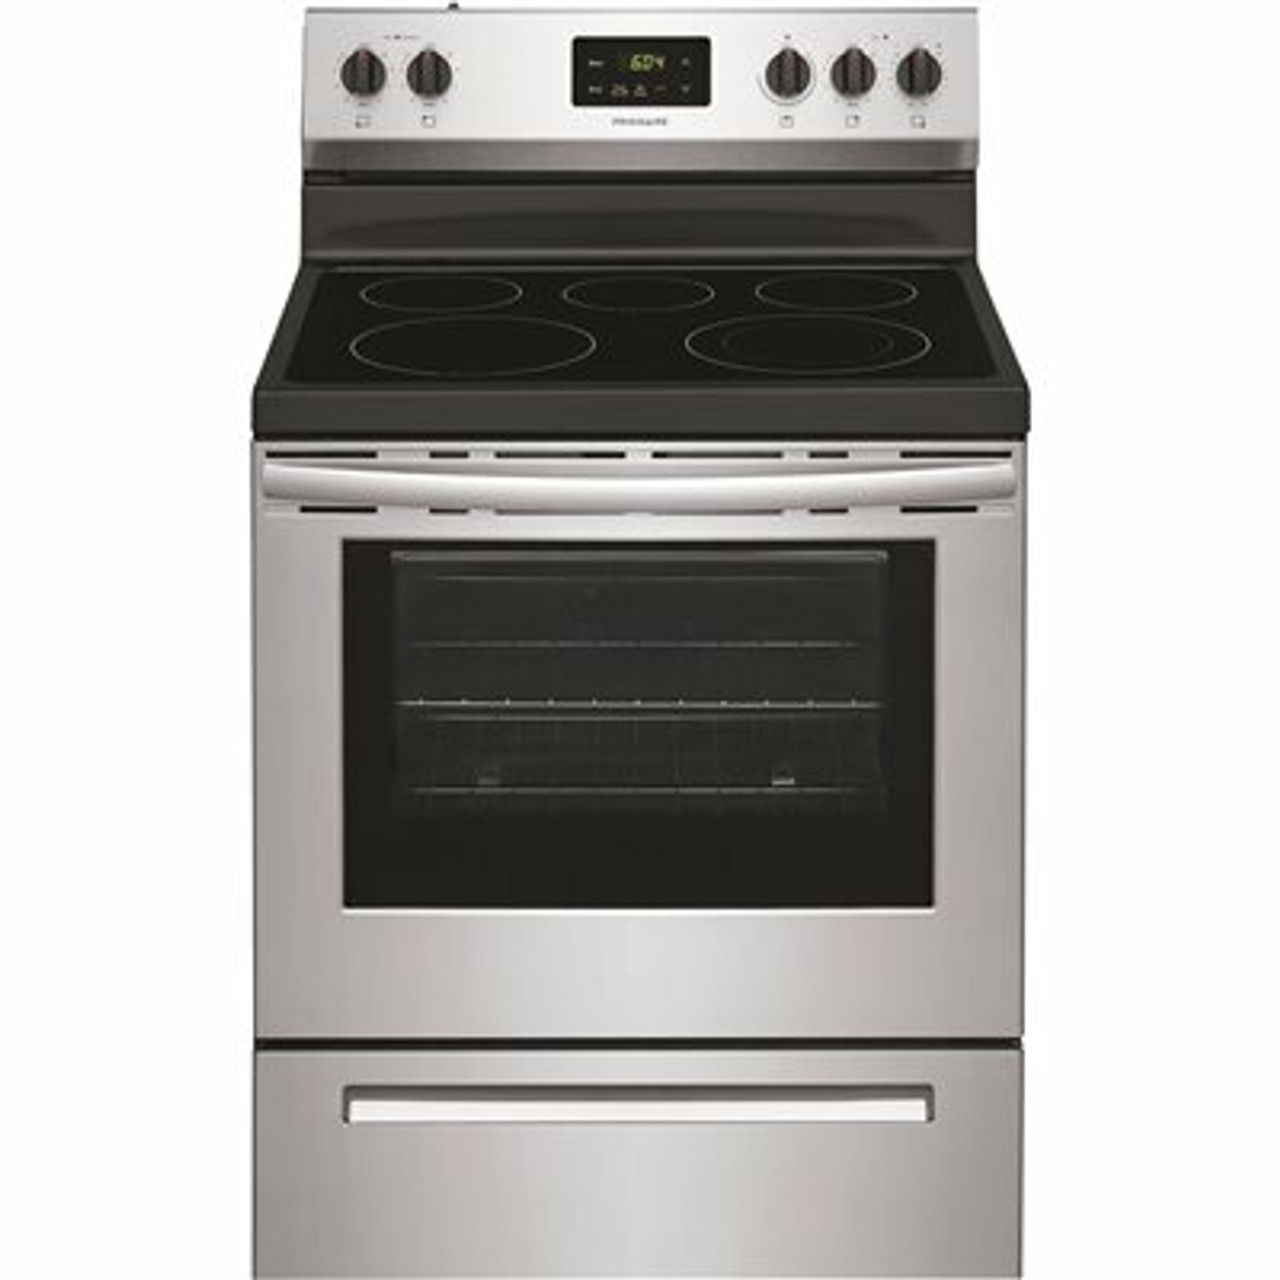 Frigidaire 30 In. 5.3 Cu. Ft. Rear Control Electric Range In Stainless Steel